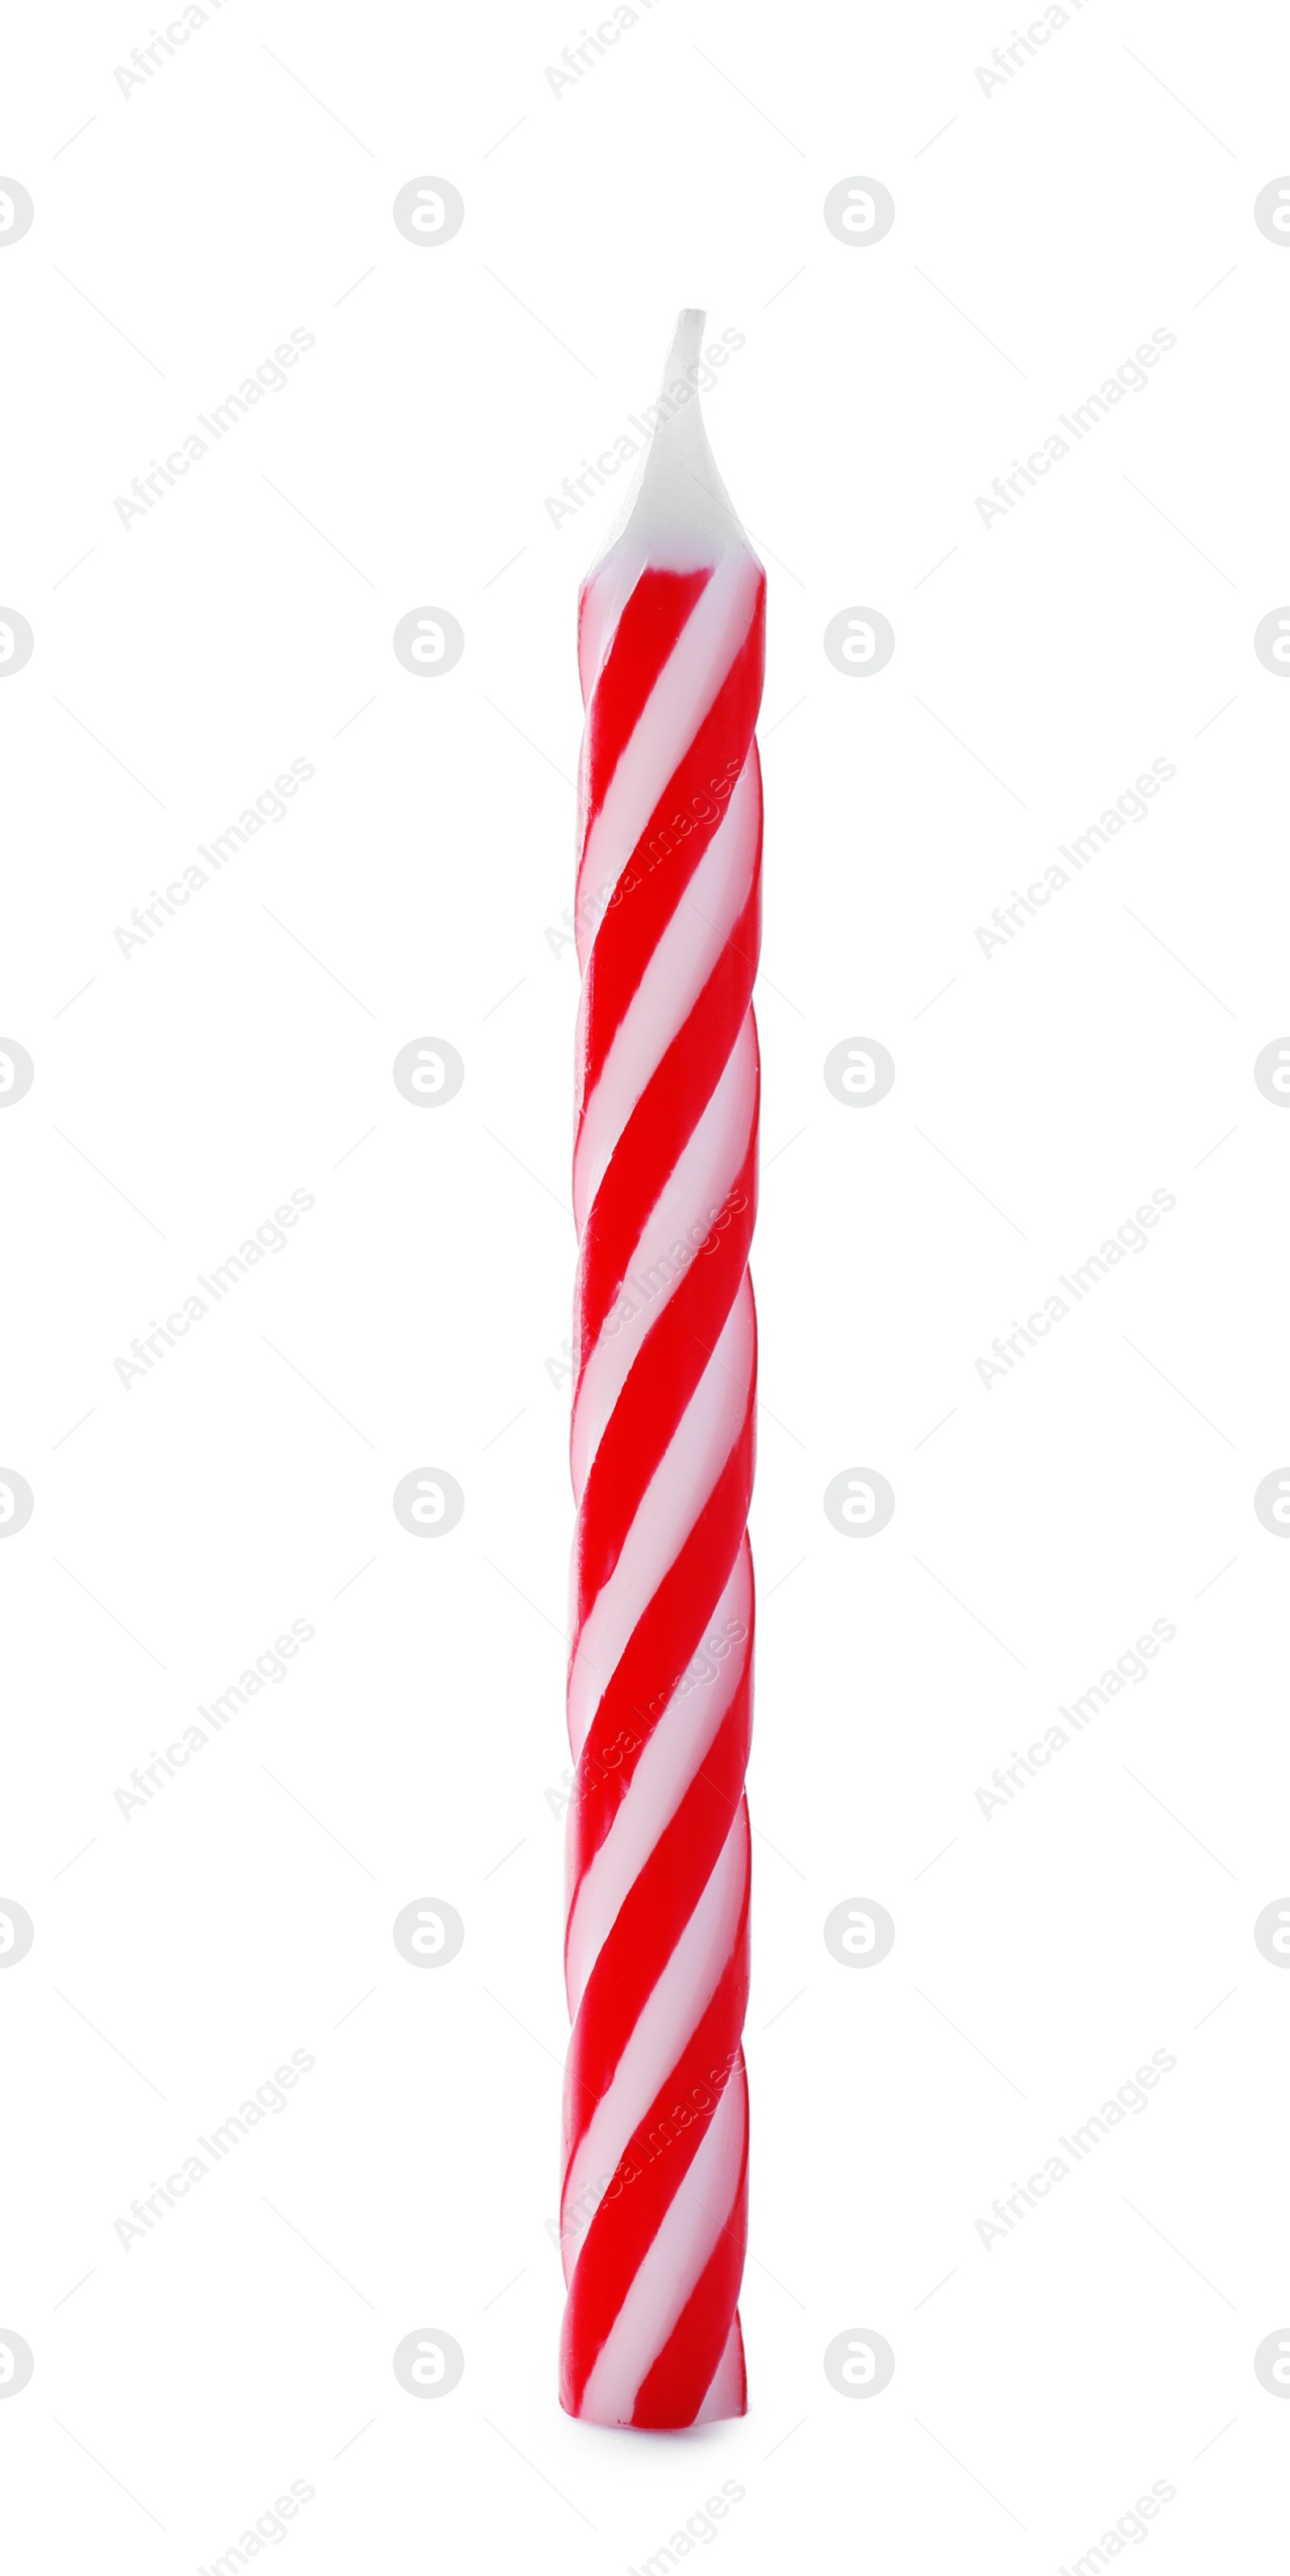 Photo of Red striped birthday candle isolated on white